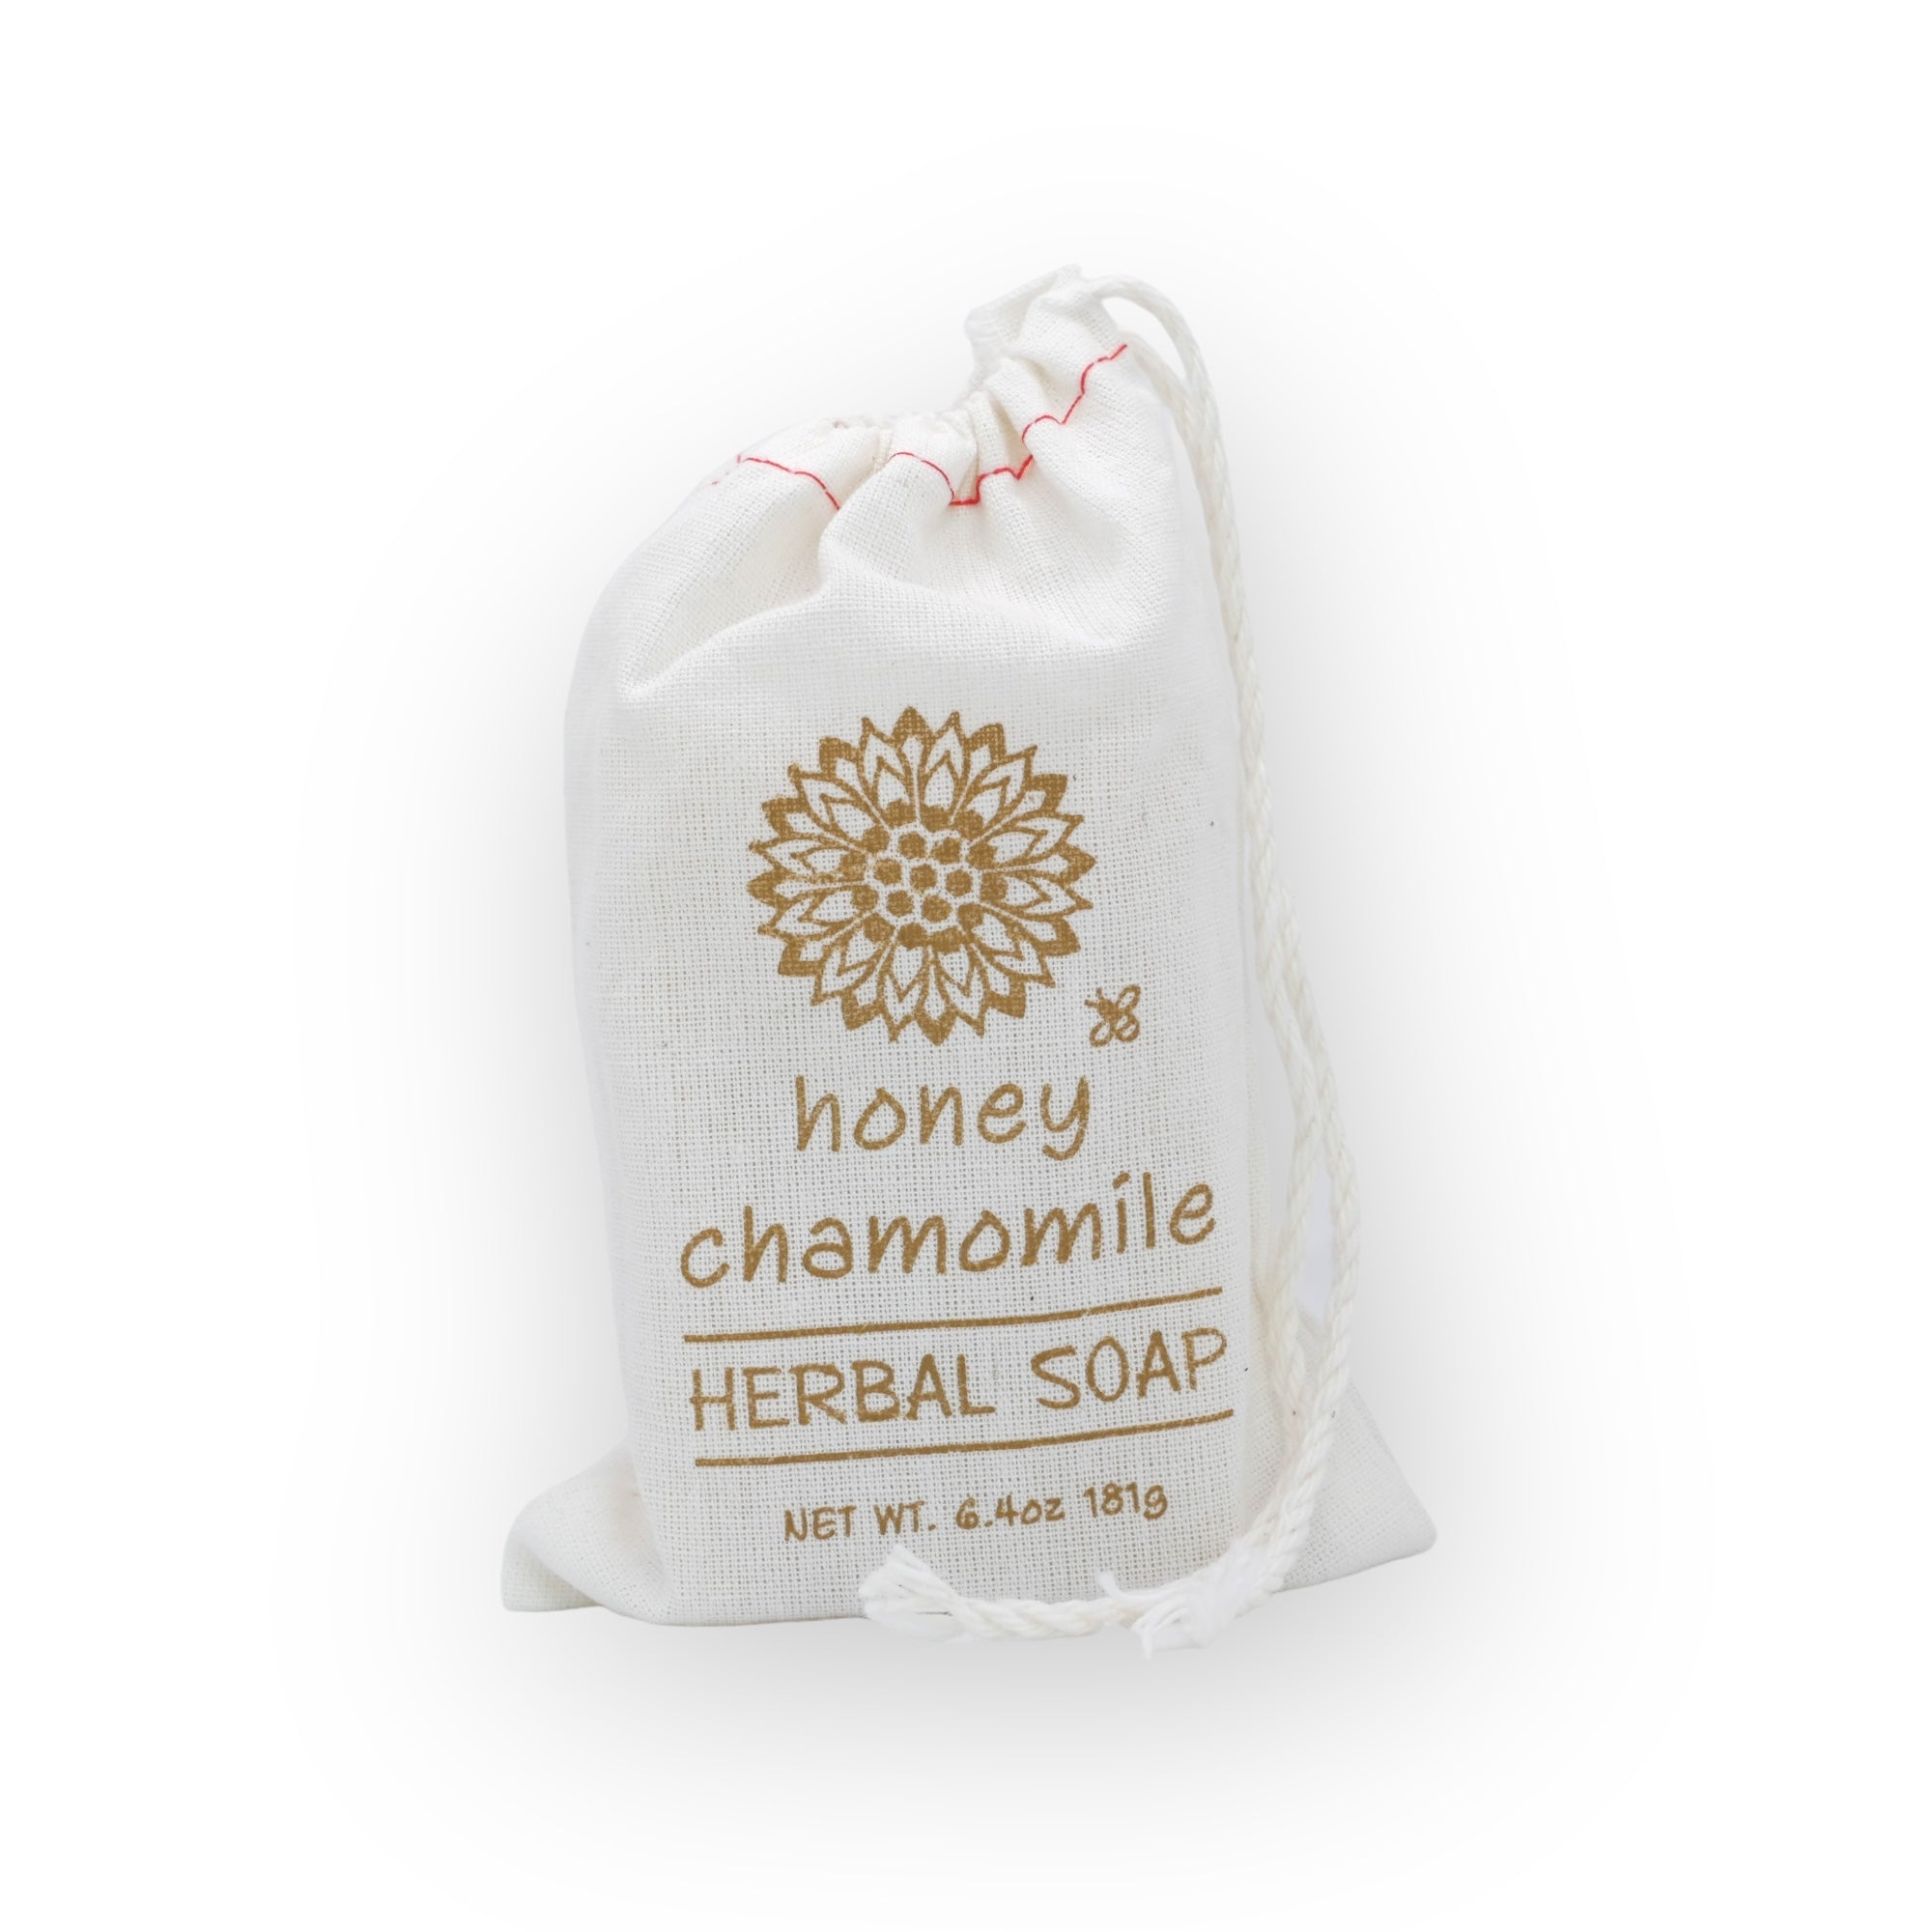 Honey Chamomile Herbal Soap by Greenwich Bay Trading Co.